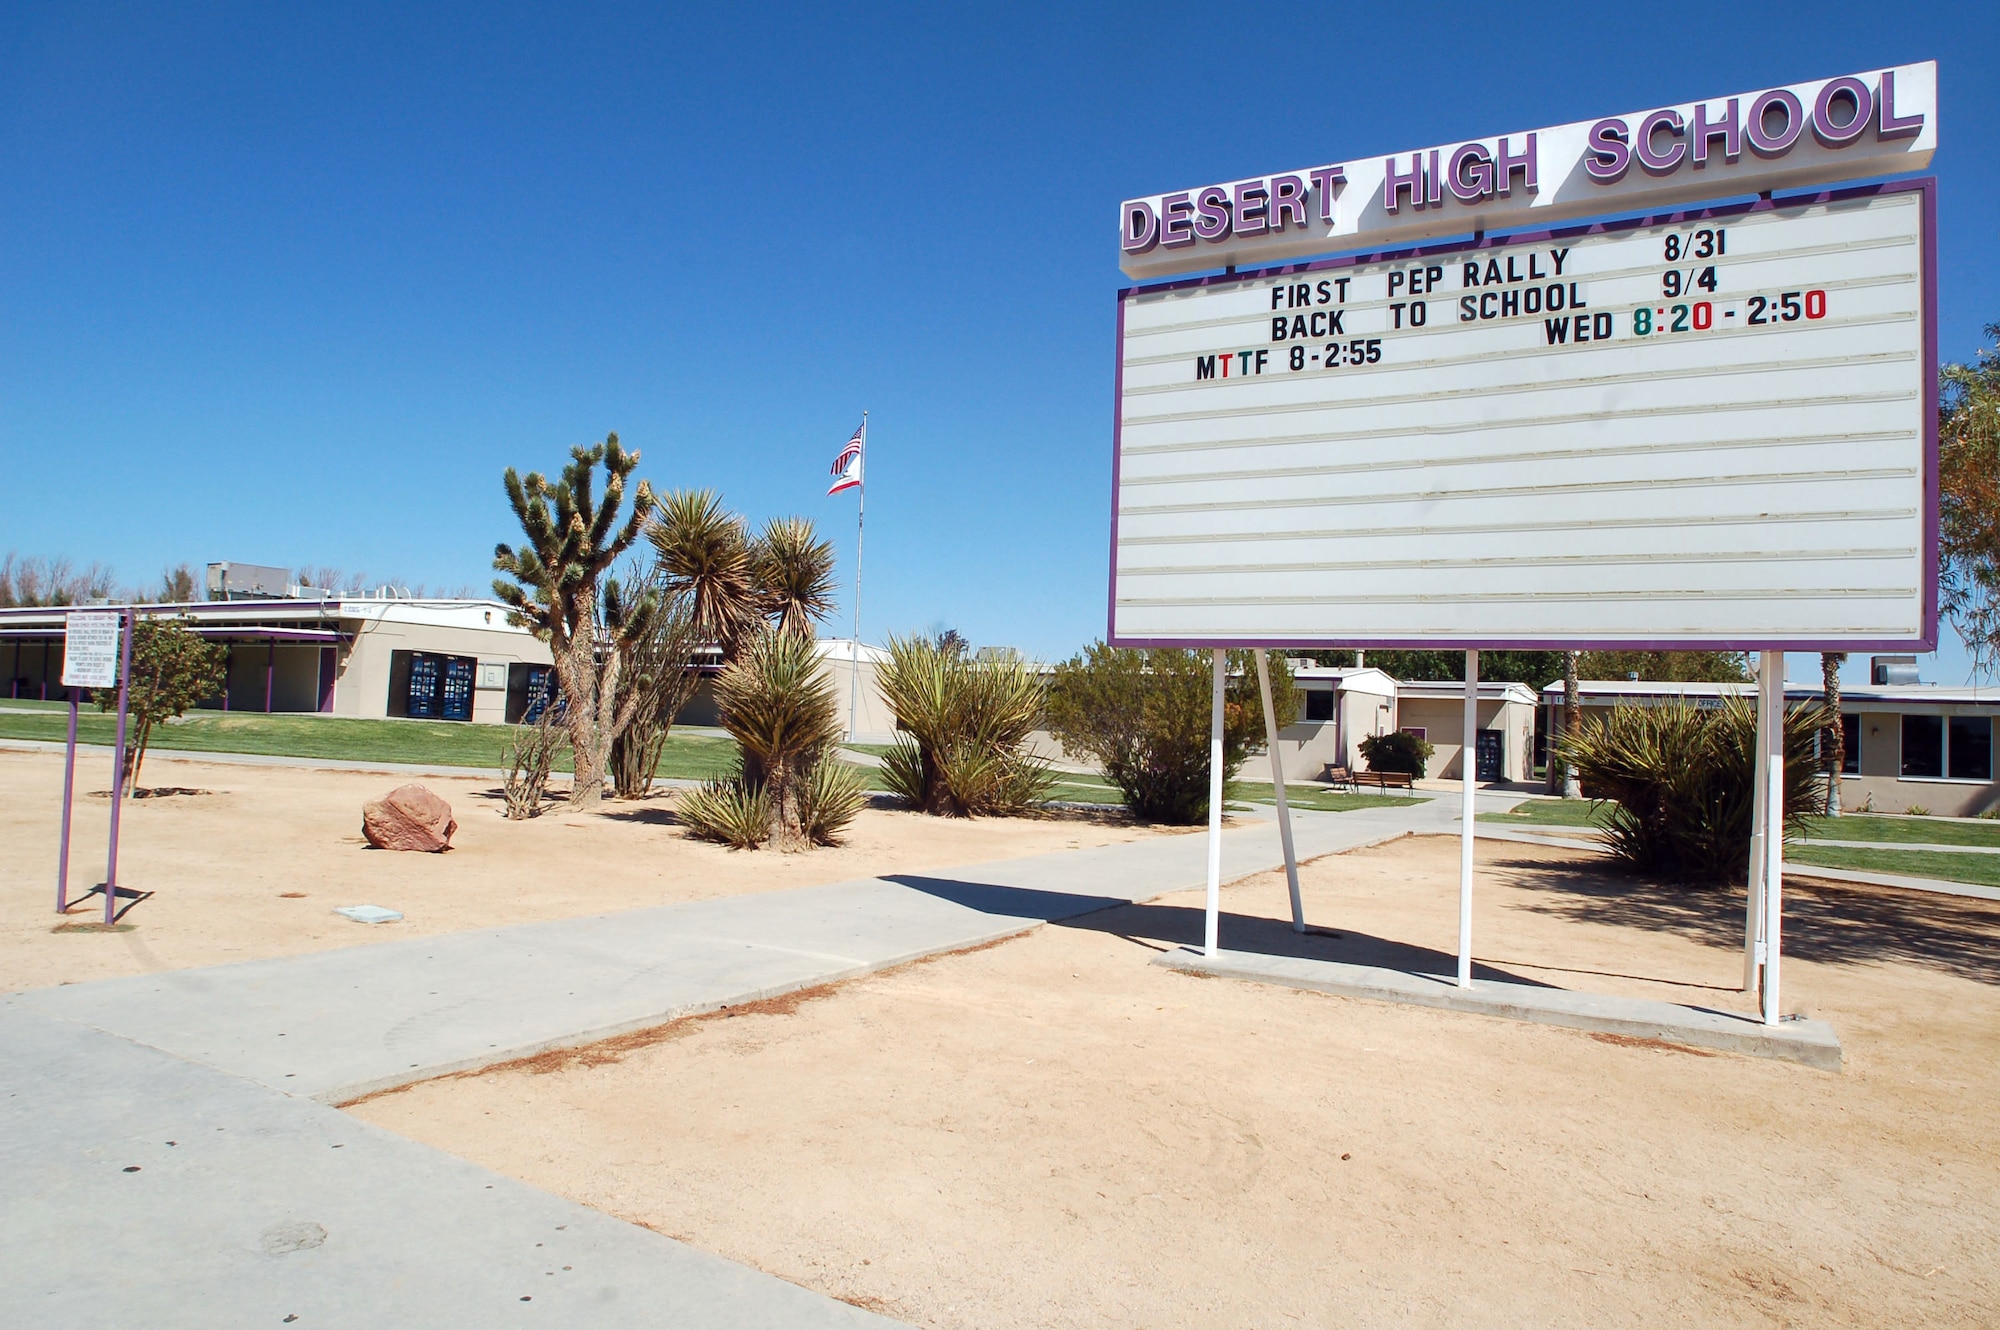 Desert High School shares a campus with Edwards Middle School here. The campus features 11 buildings. Both schools provide education to children whose parents either reside or work at Edwards Air Force Base. (Photo by Airman 1st Class Julius Delos Reyes)